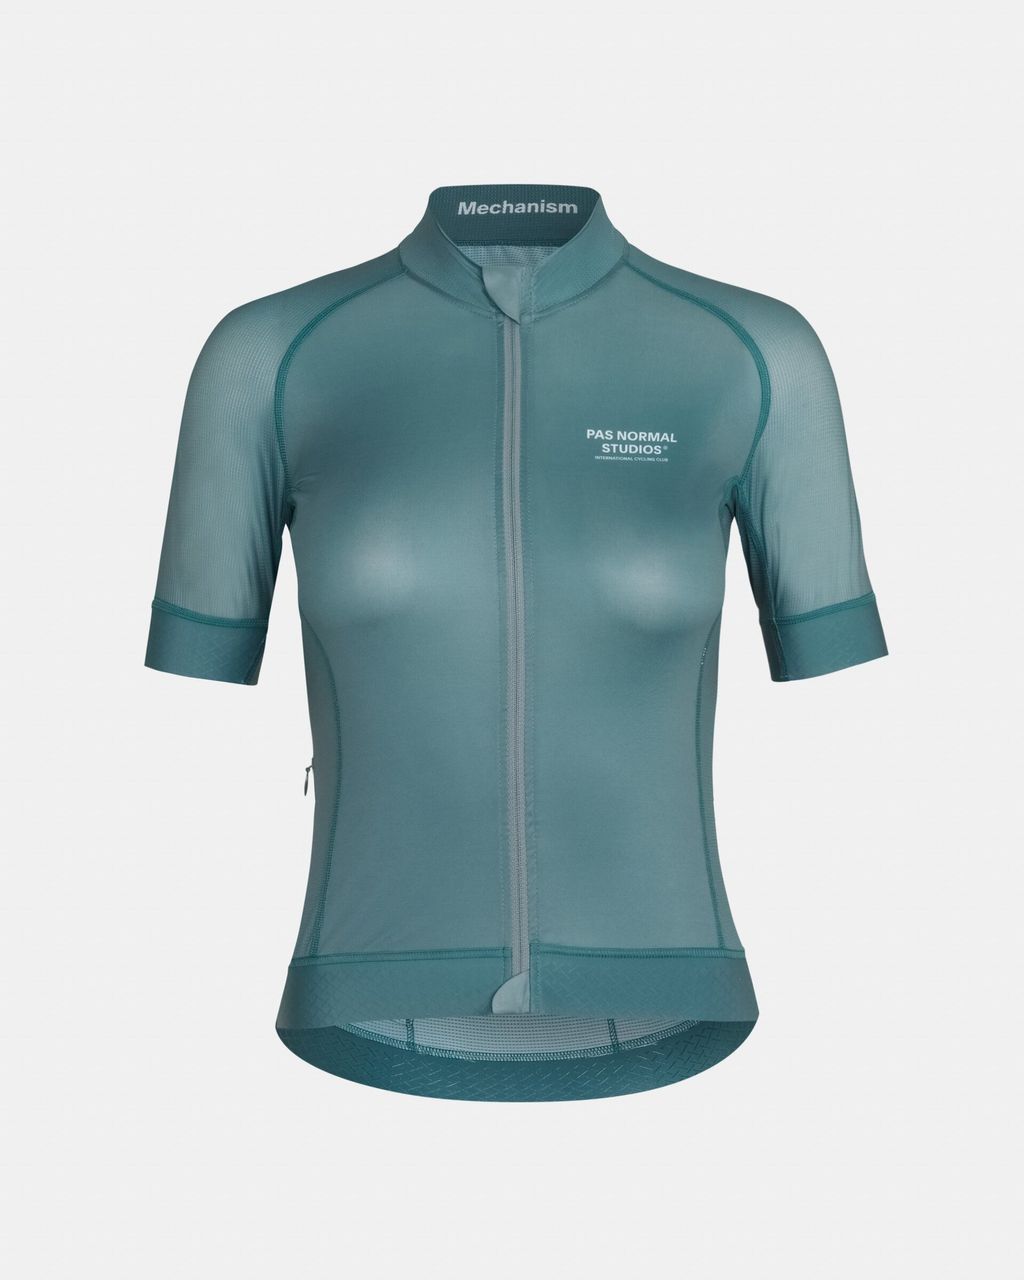 Womens-Mechanism-Jersey-Dusty-Teal_Front-pdp-page